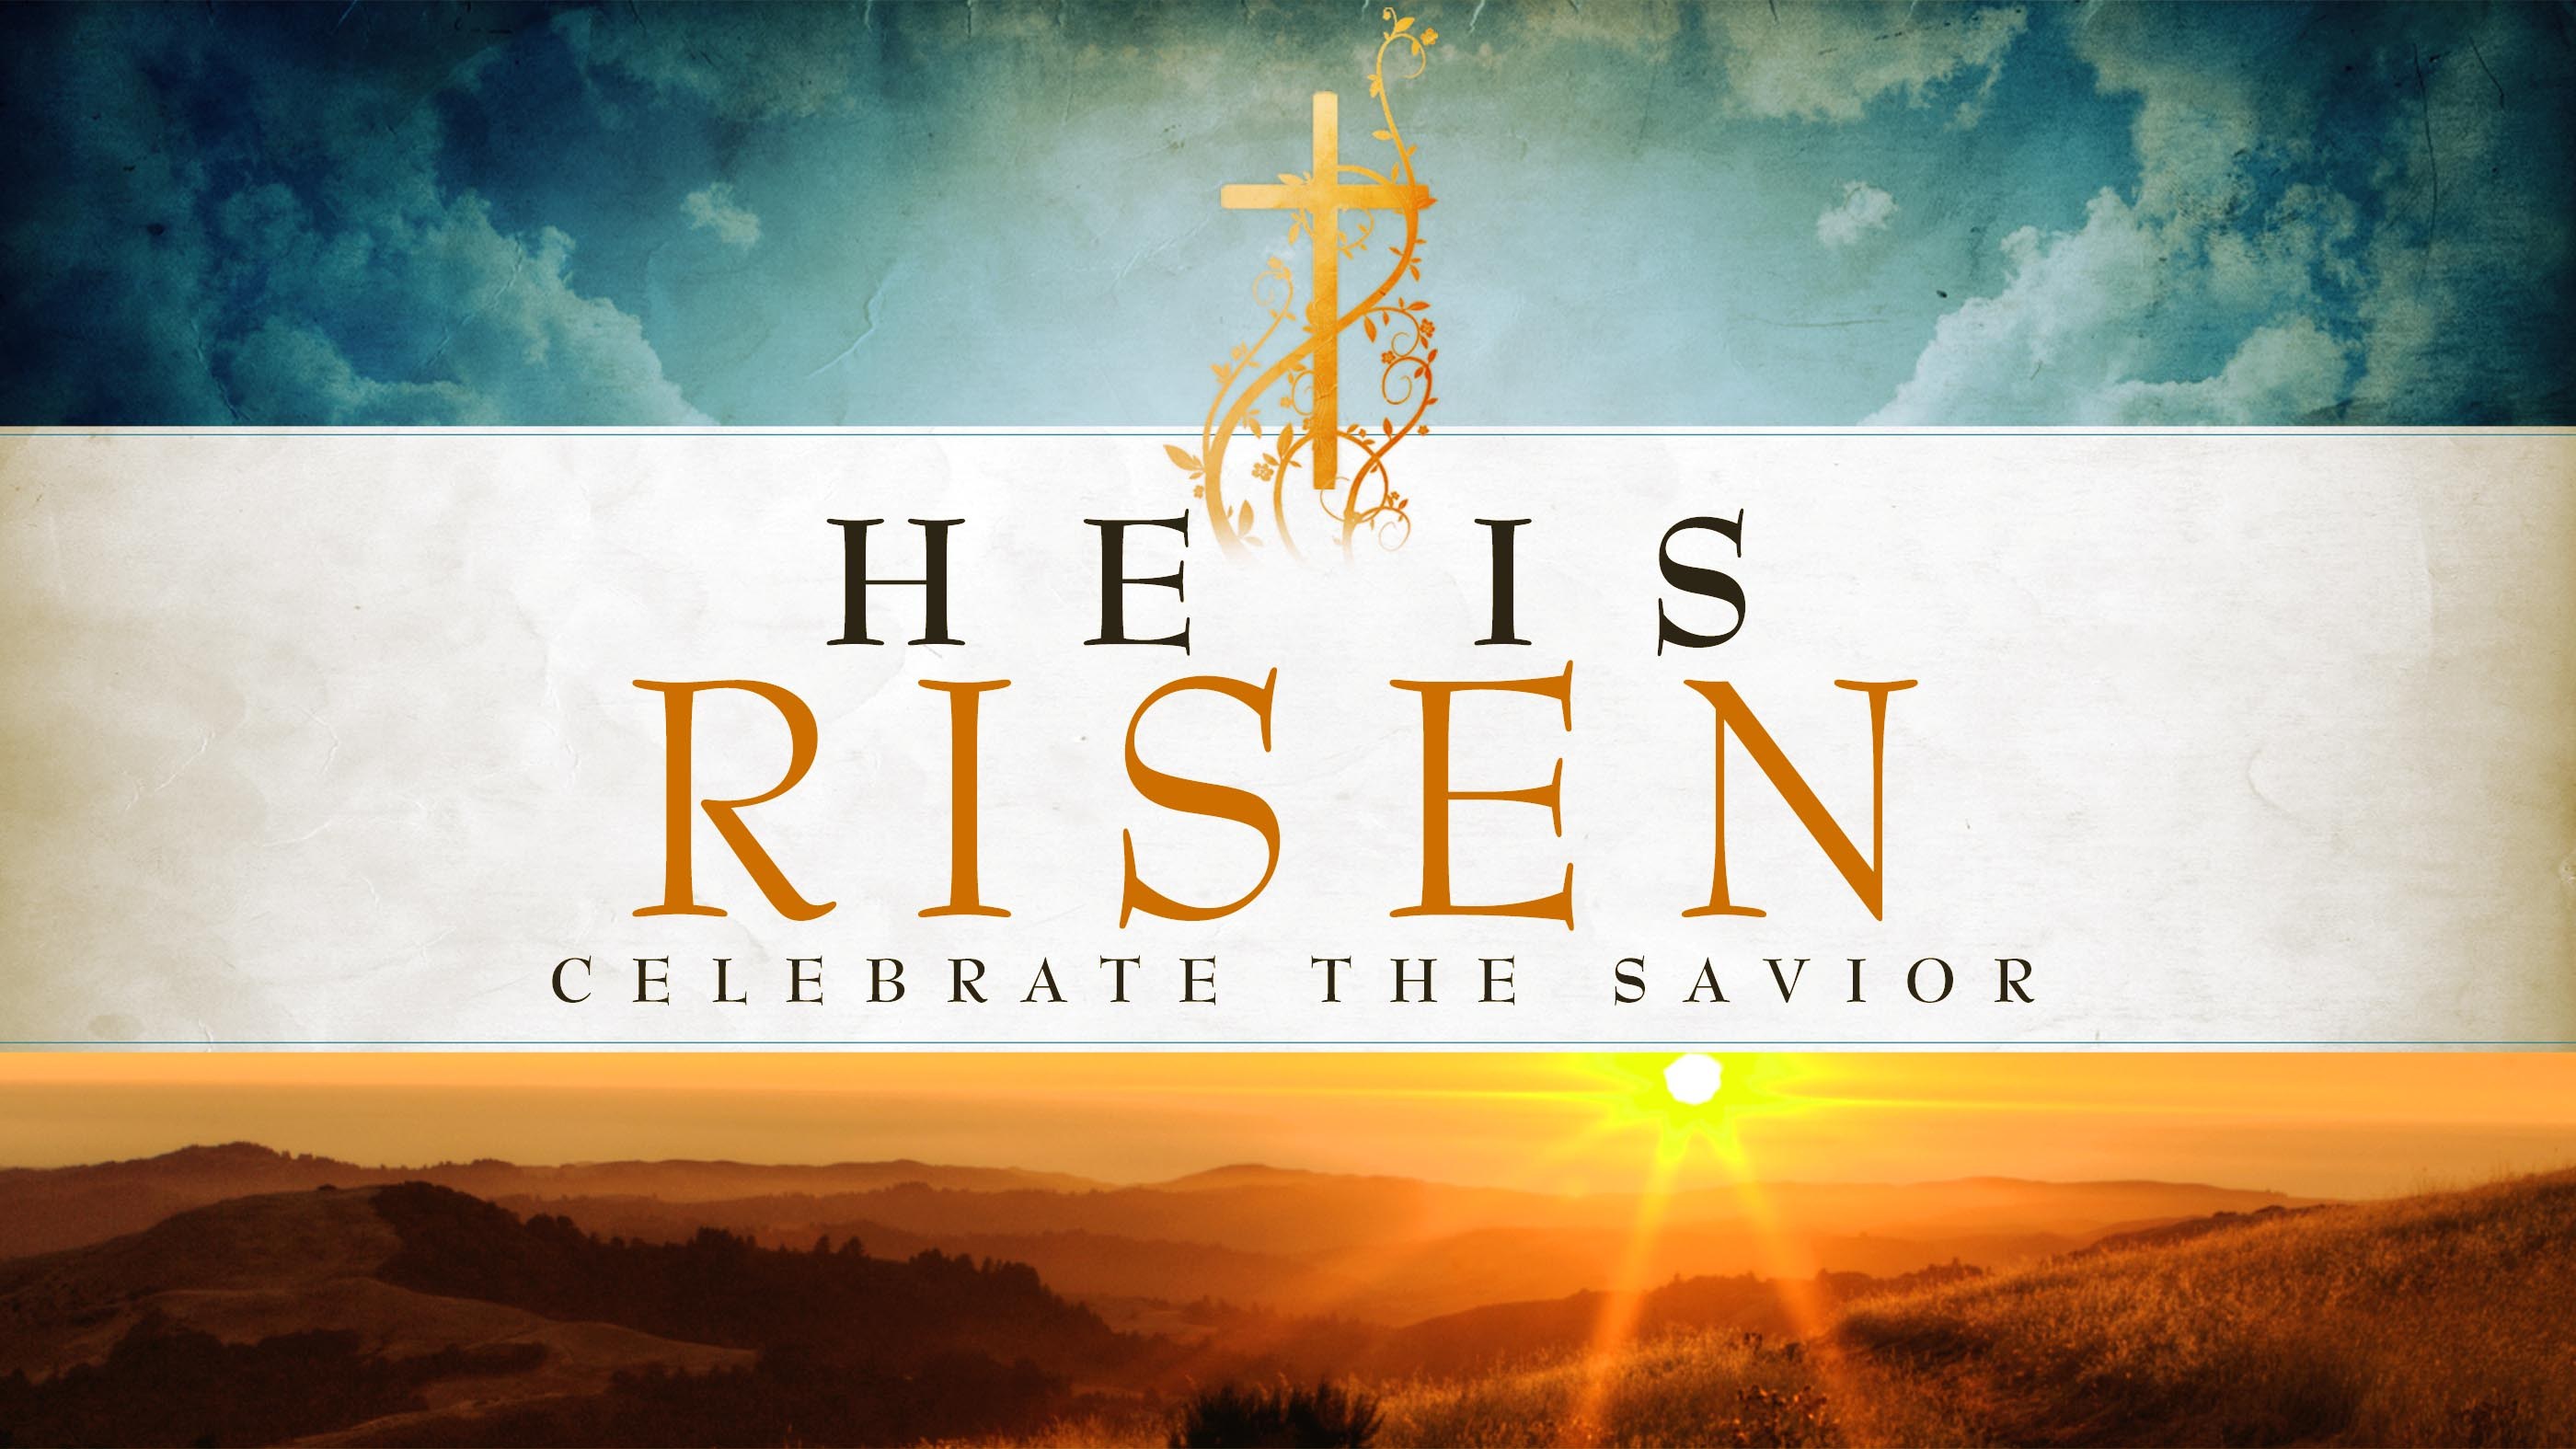 Easter Images Hd